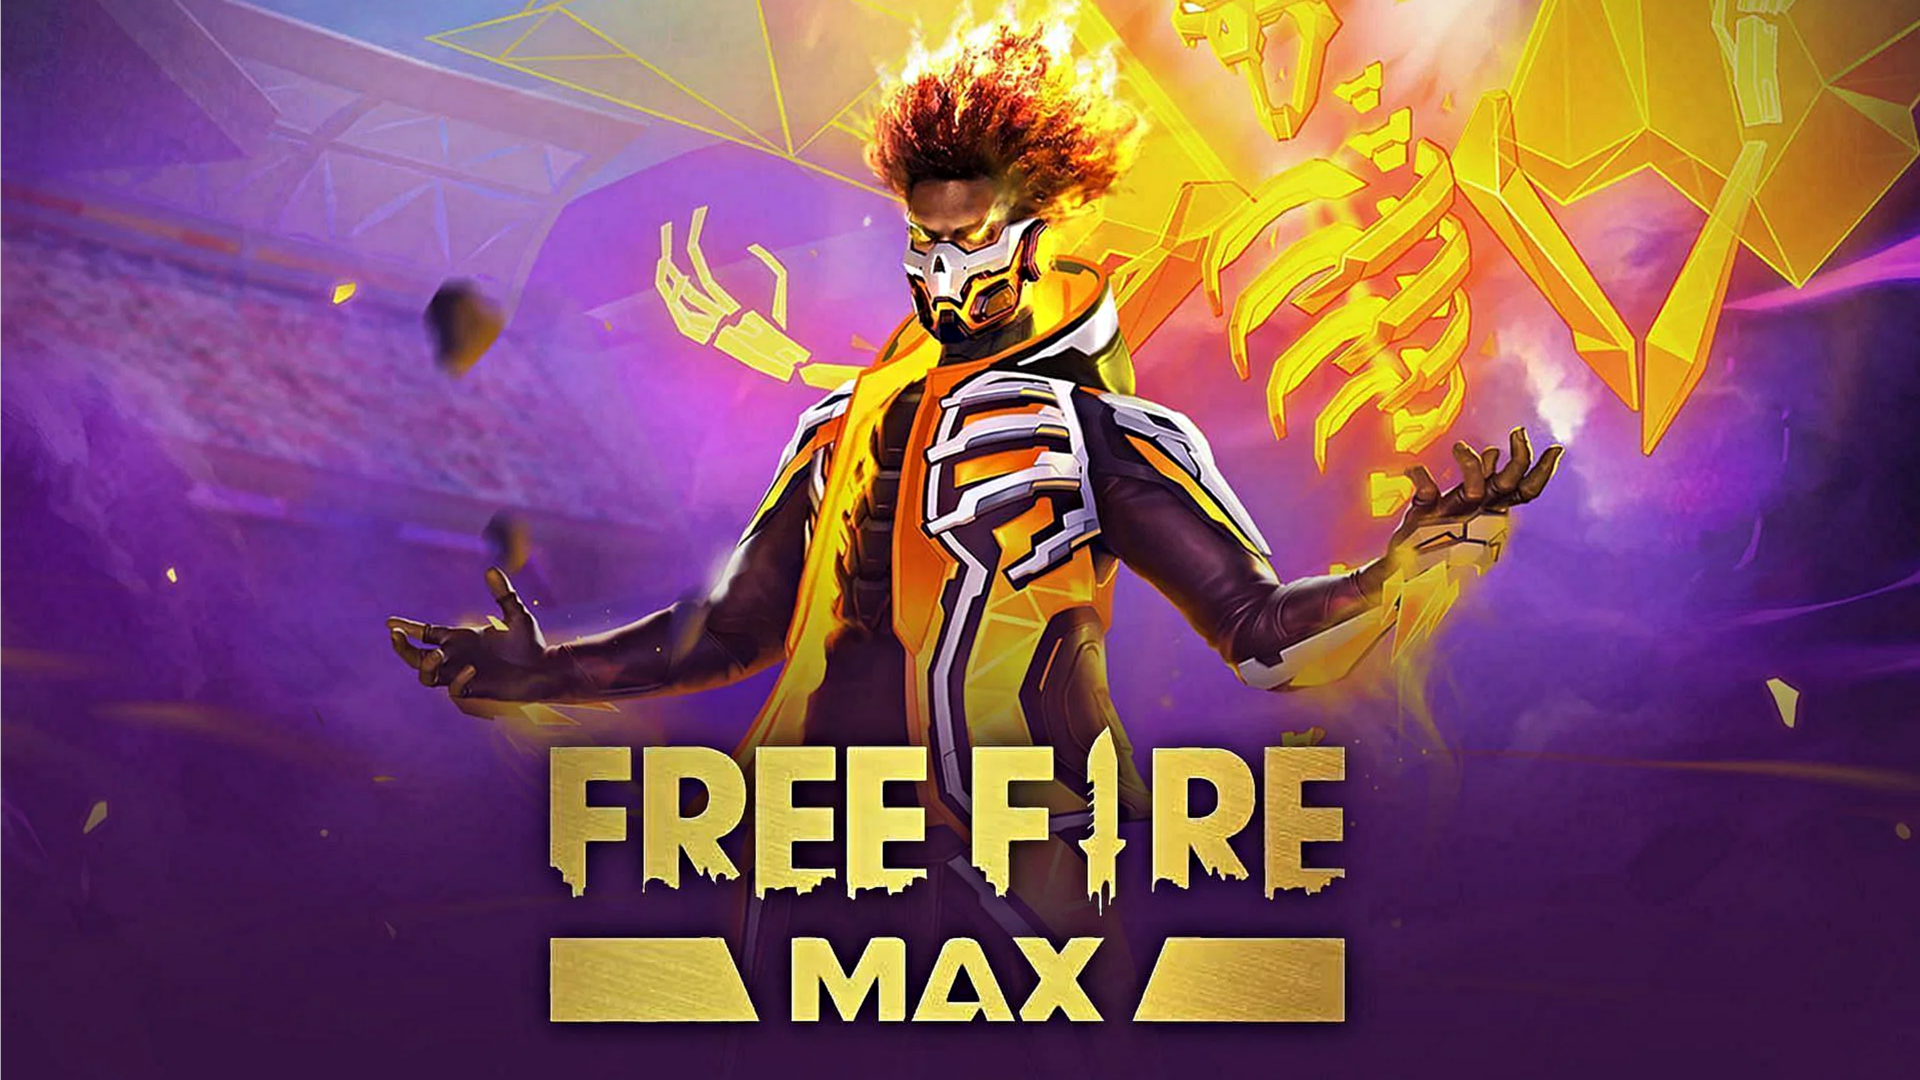 Free Fire MAX codes for June 11: How to redeem